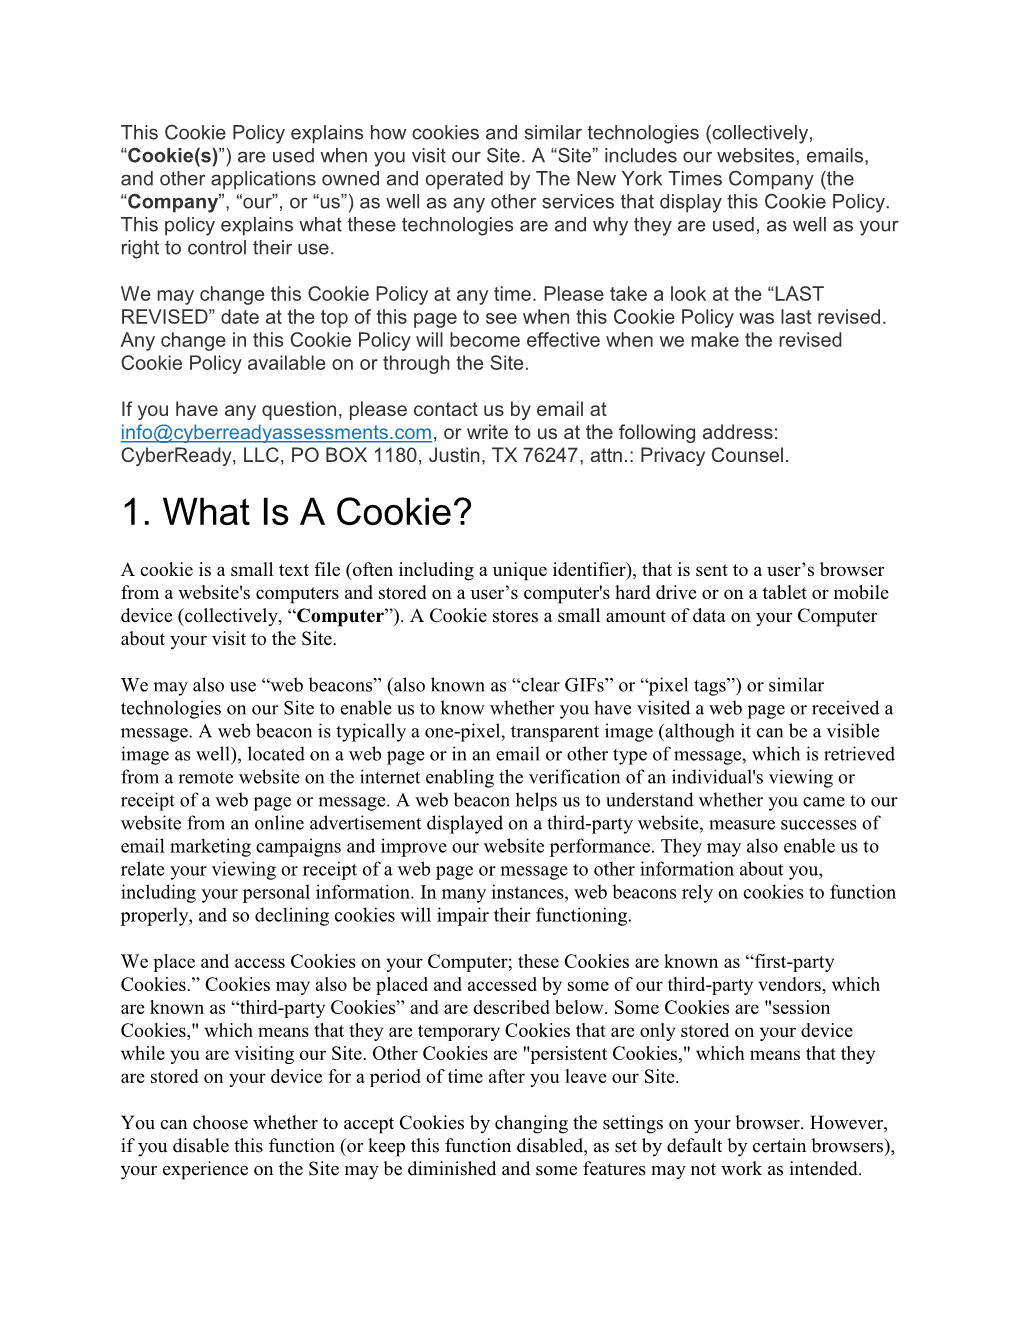 1. What Is a Cookie?